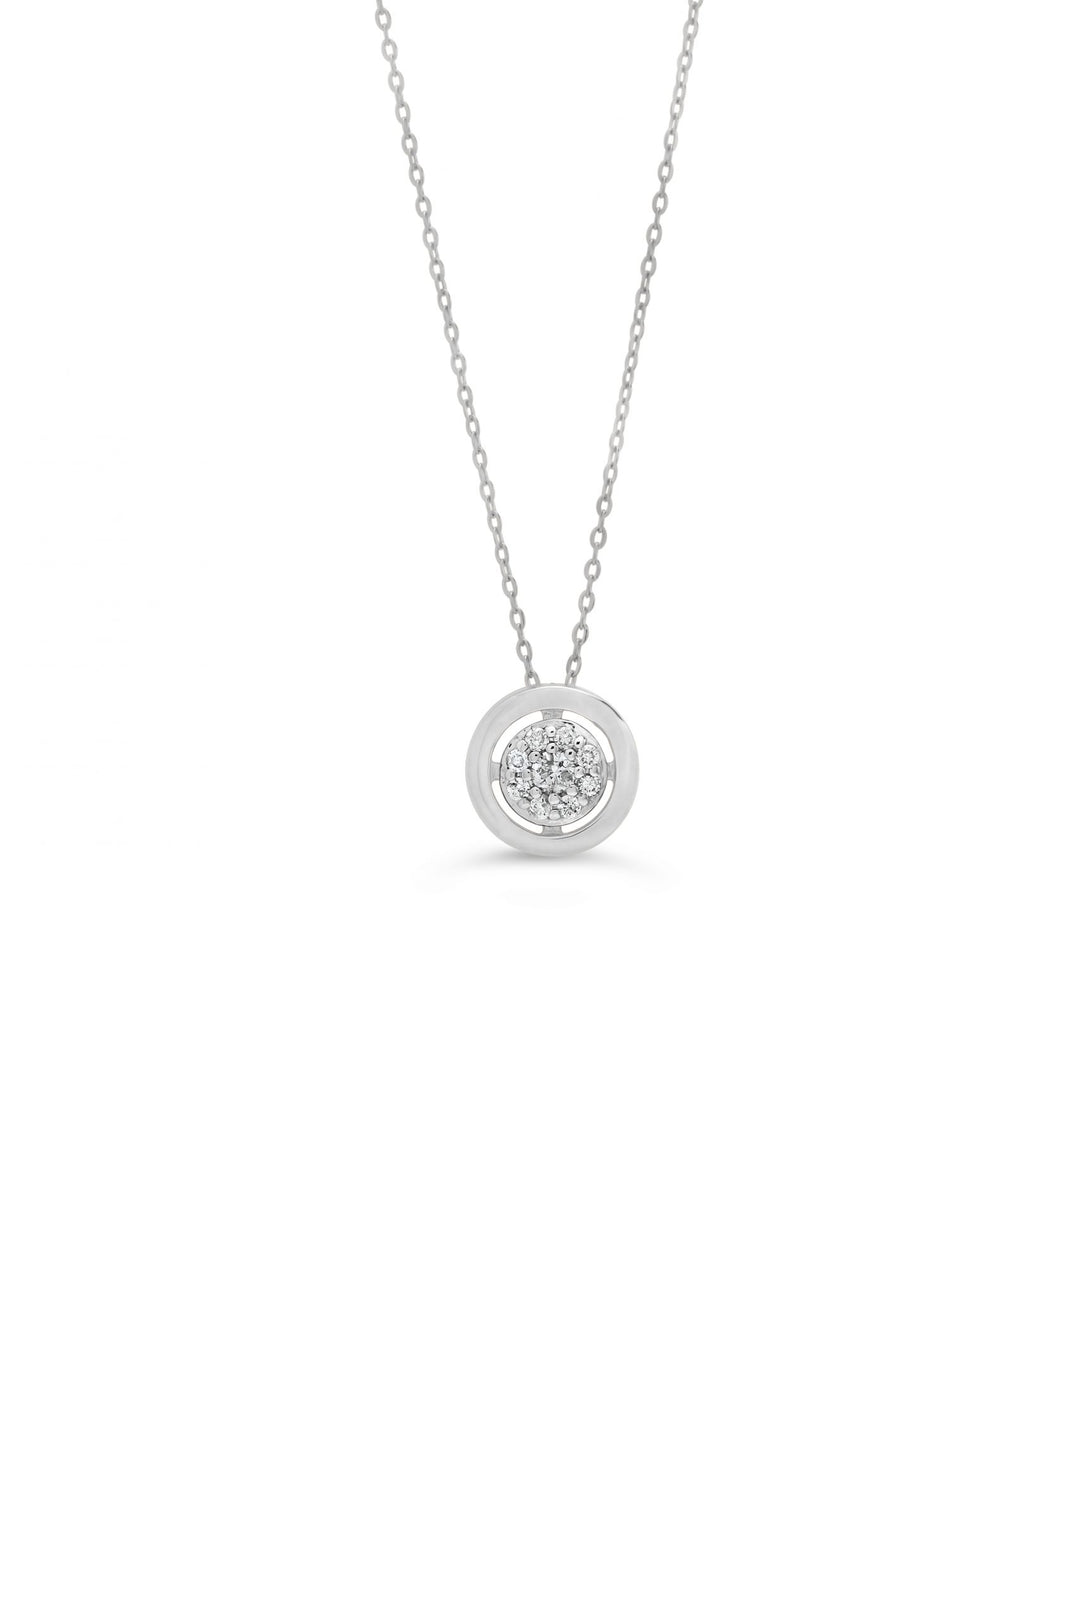 Elegant 10K white gold circle pendant with a pavé of diamonds totaling 0.05 ct, hanging on a fine white gold chain, perfect for a refined and classic look.